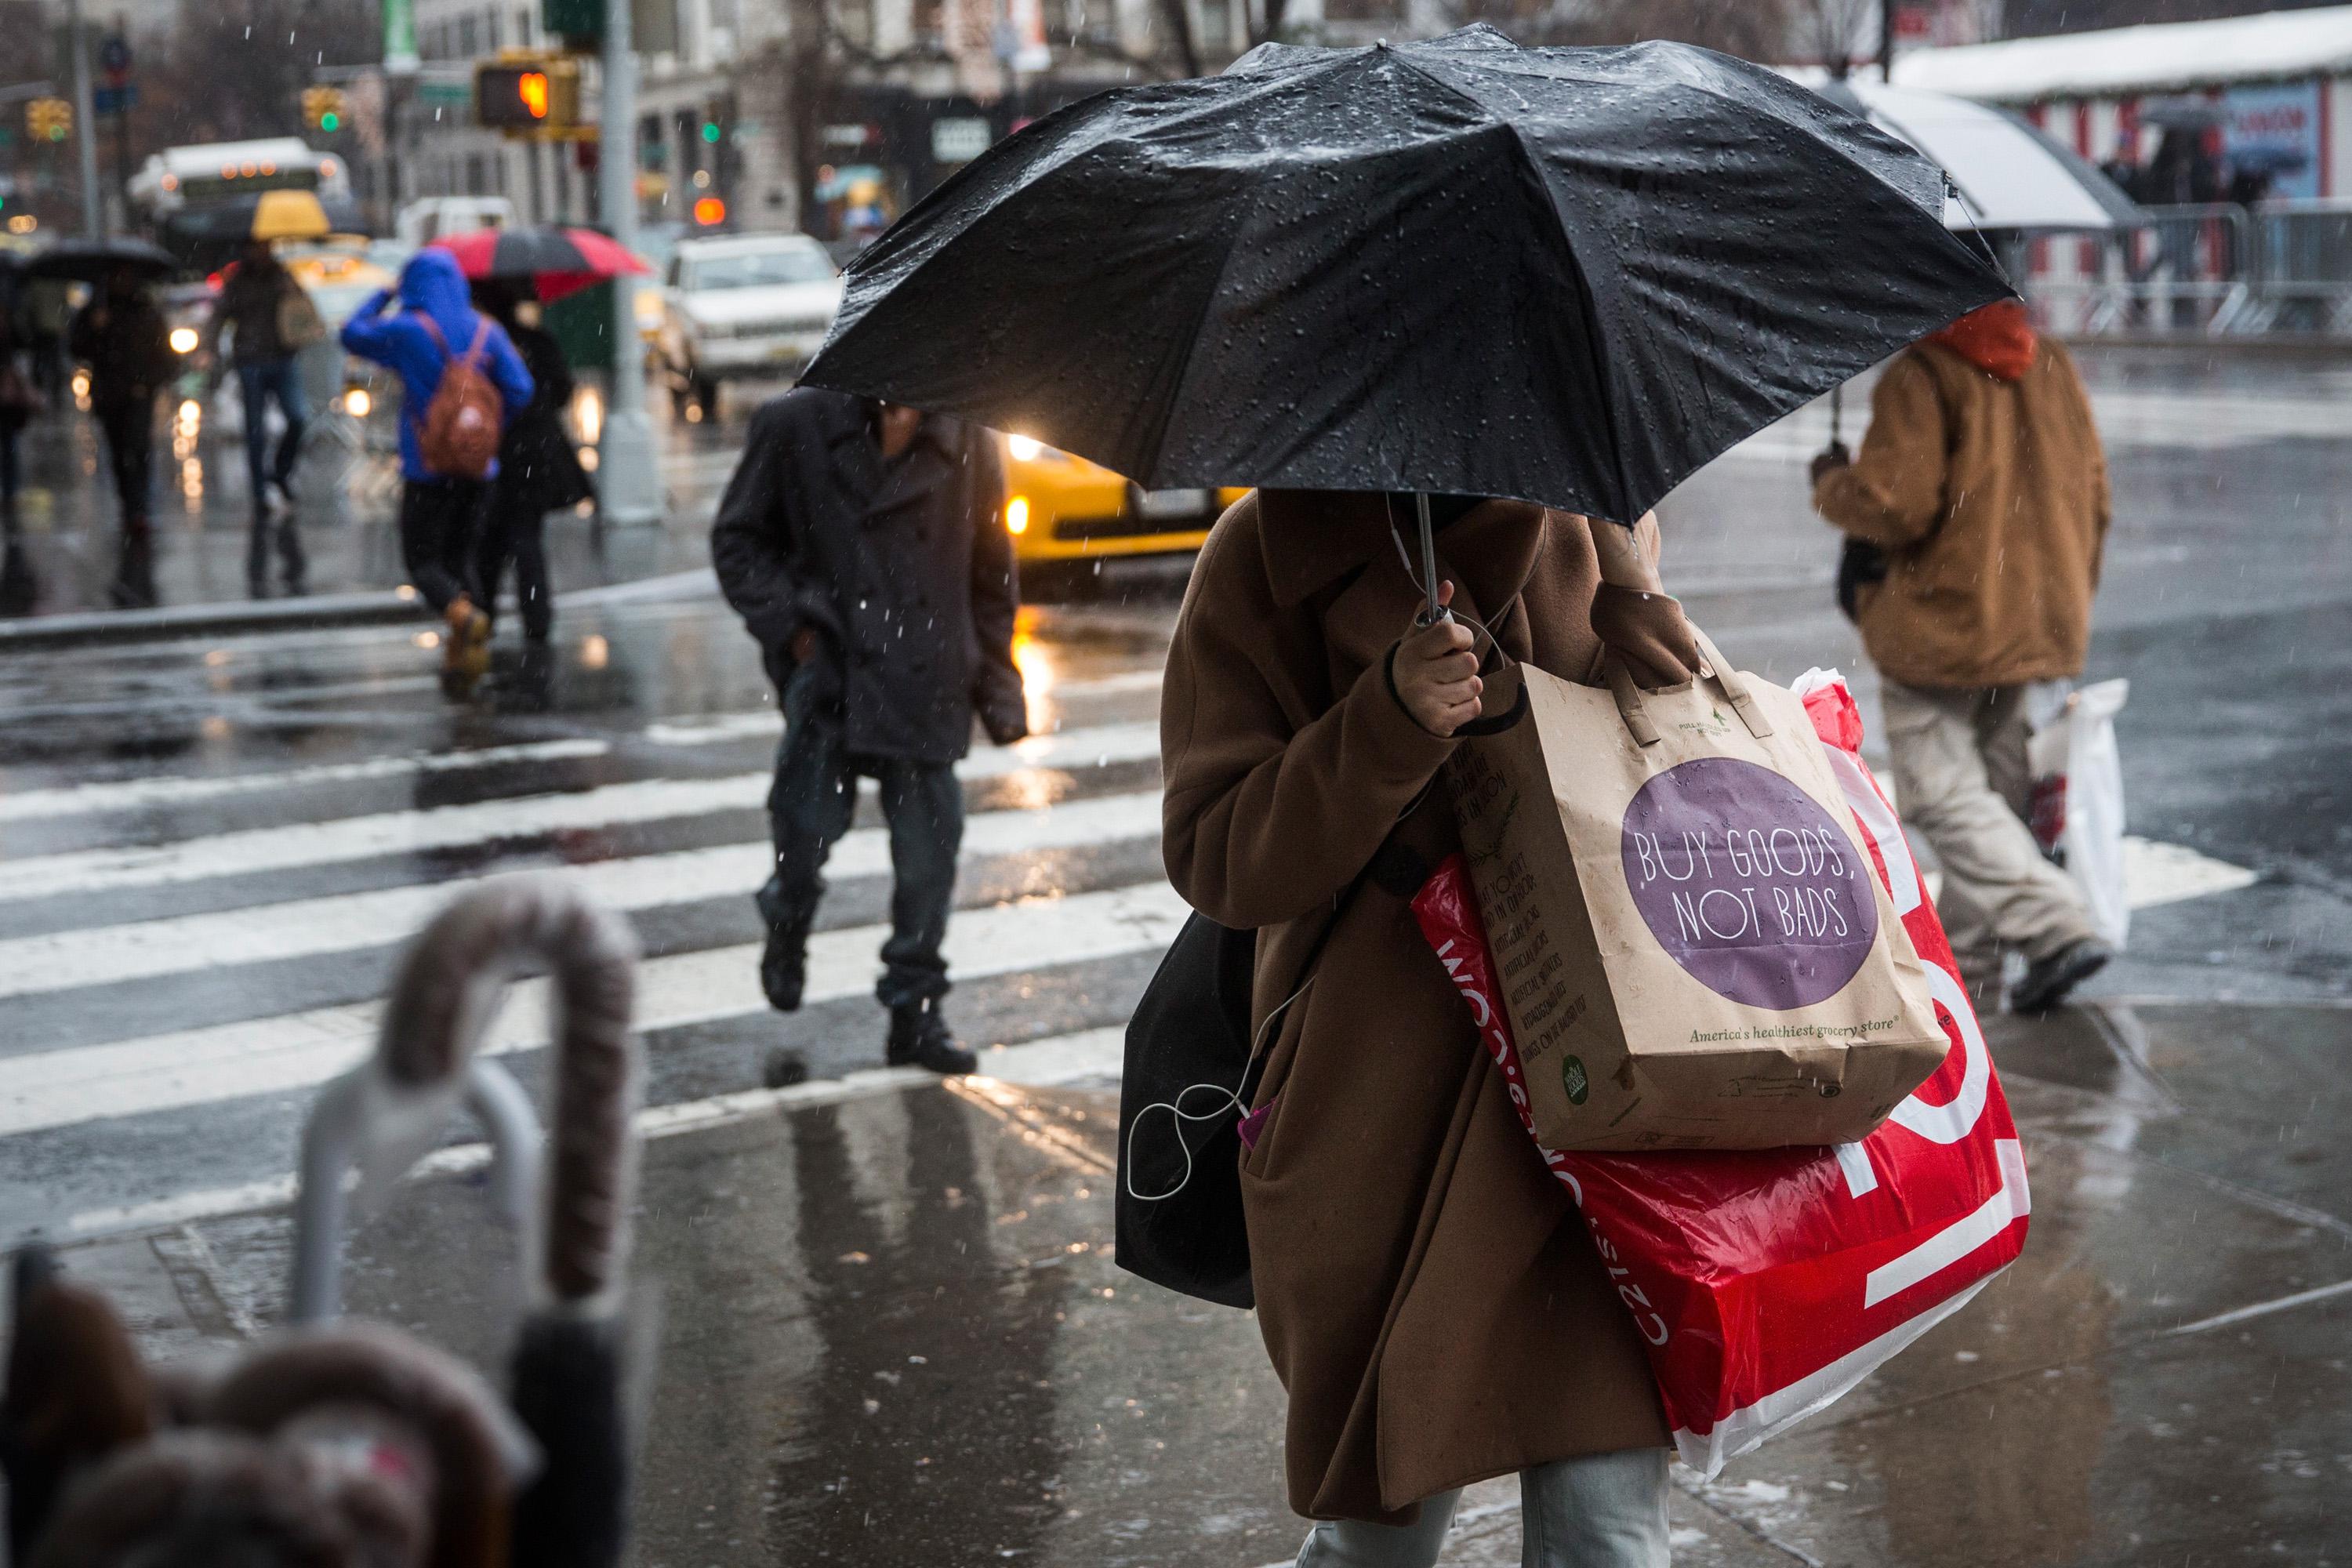 A woman crosses the street in the rain, a black umbrella covering her face. She is carrying several shopping bags.